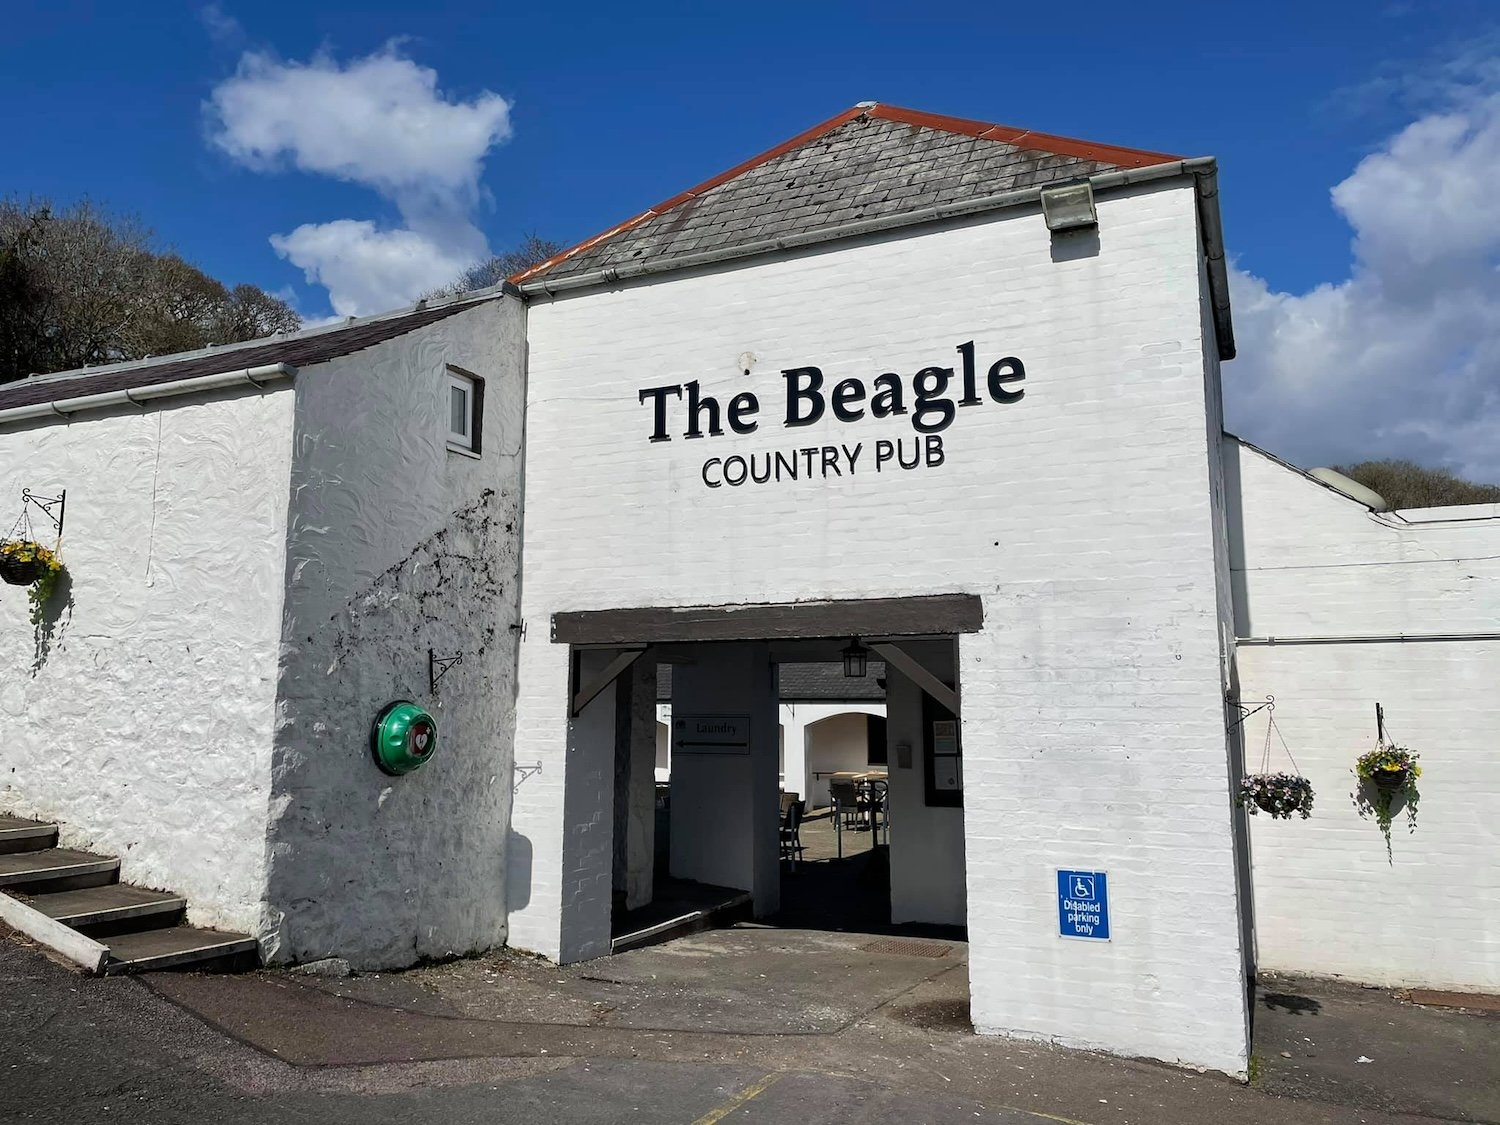 The Beagle Country Pub - the best fish and chips in Scotland  